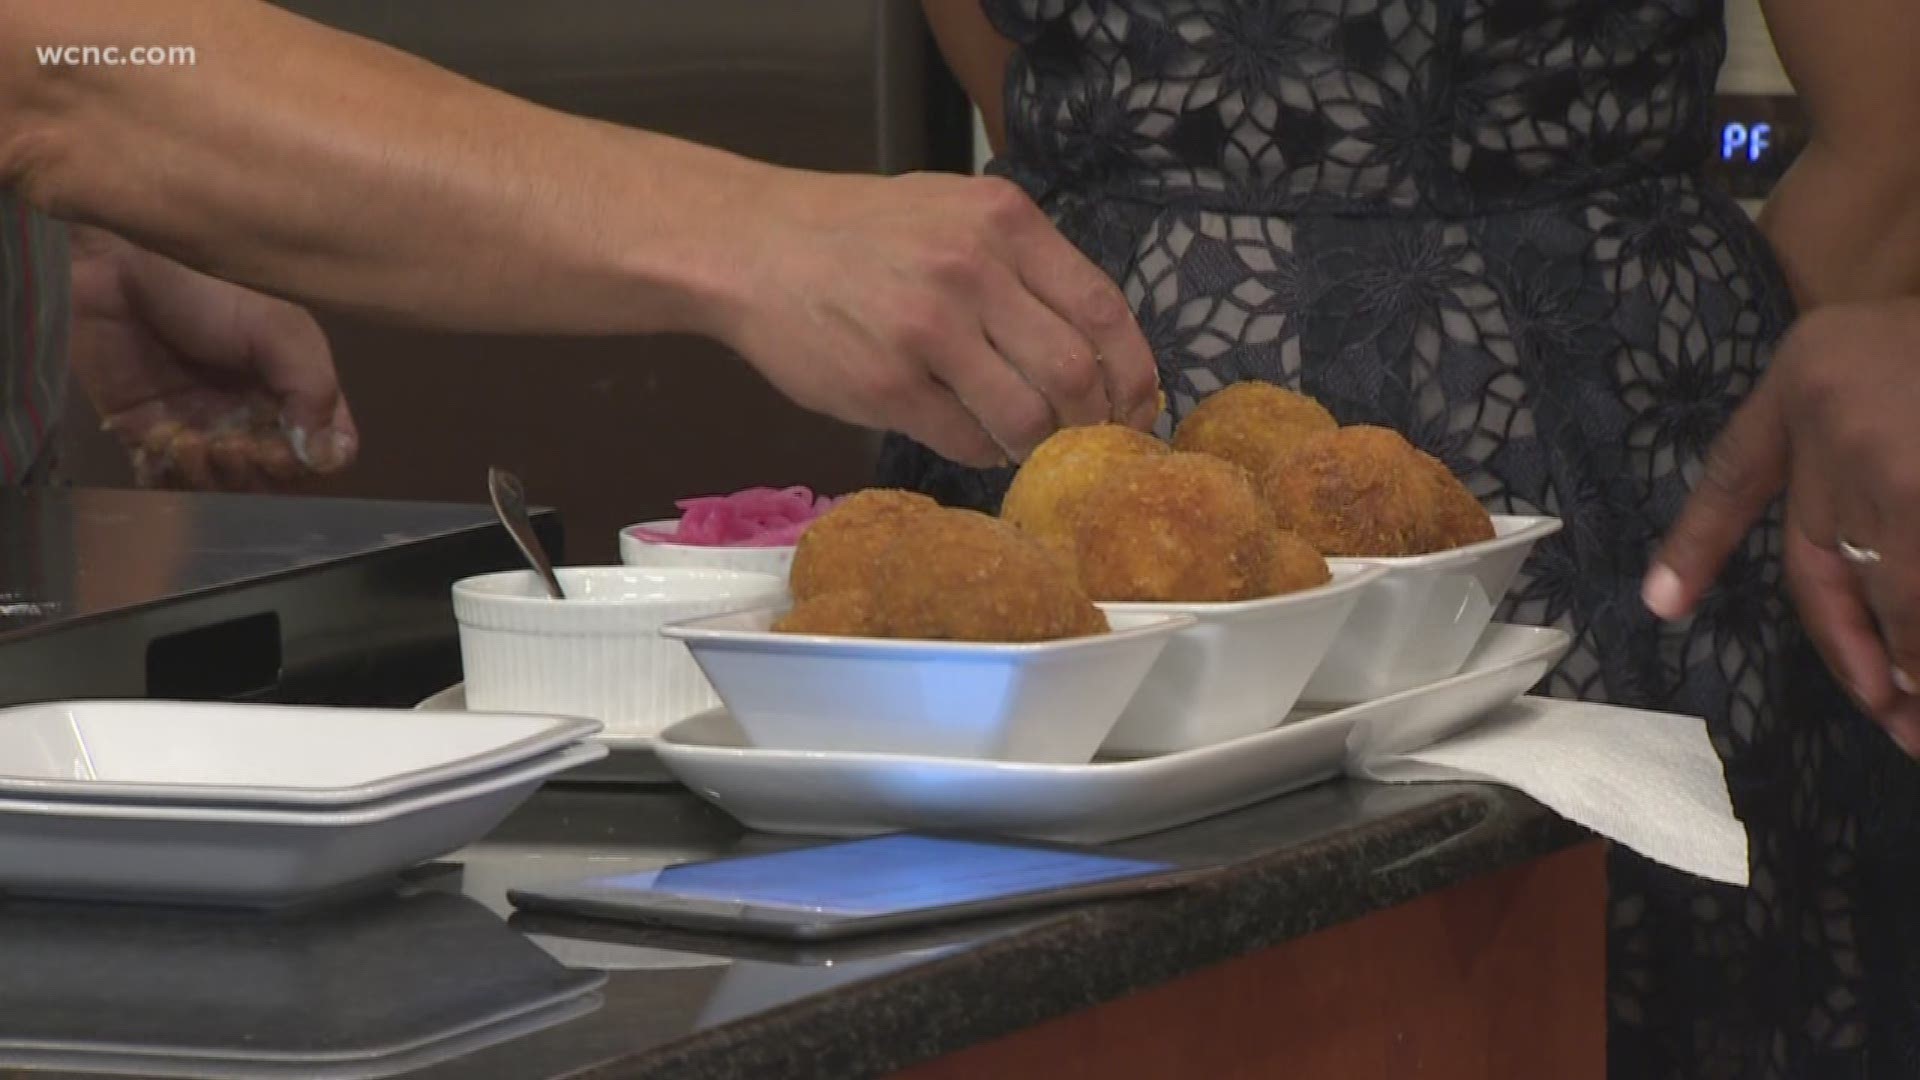 Chef Geoff Bragg shows us how to make a popular Cuban street food item that The Common Market Oakwold now offers.